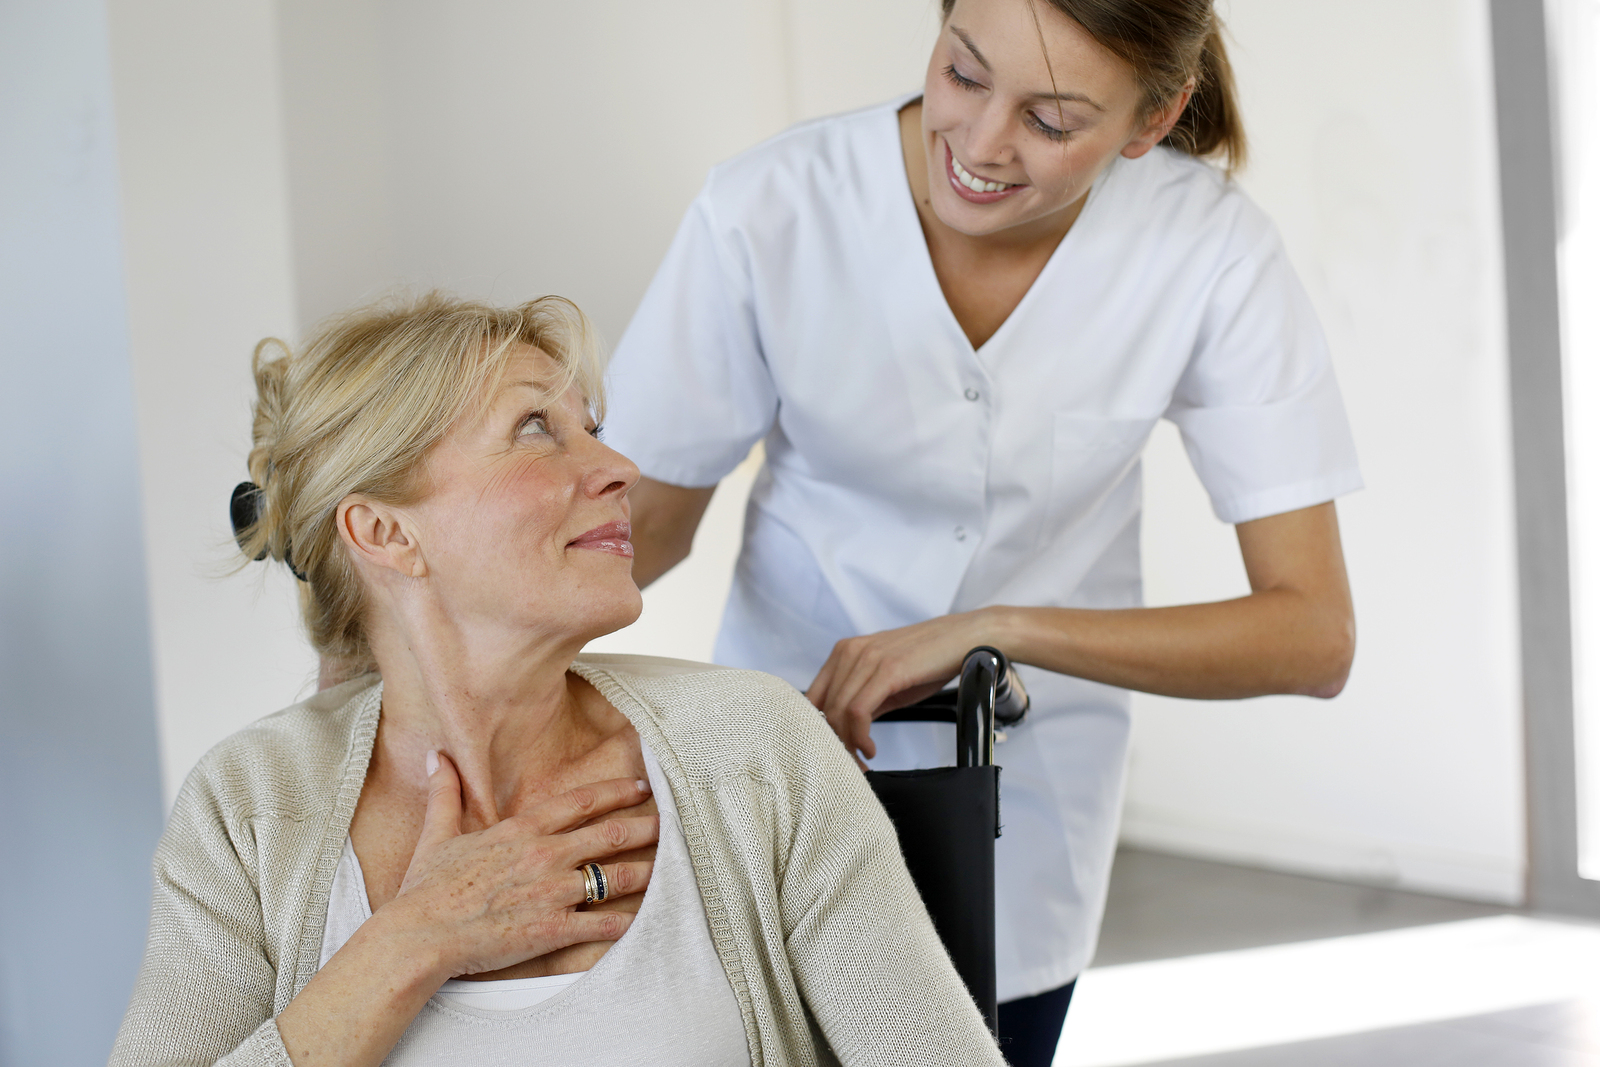 Get Home Health Aide Training